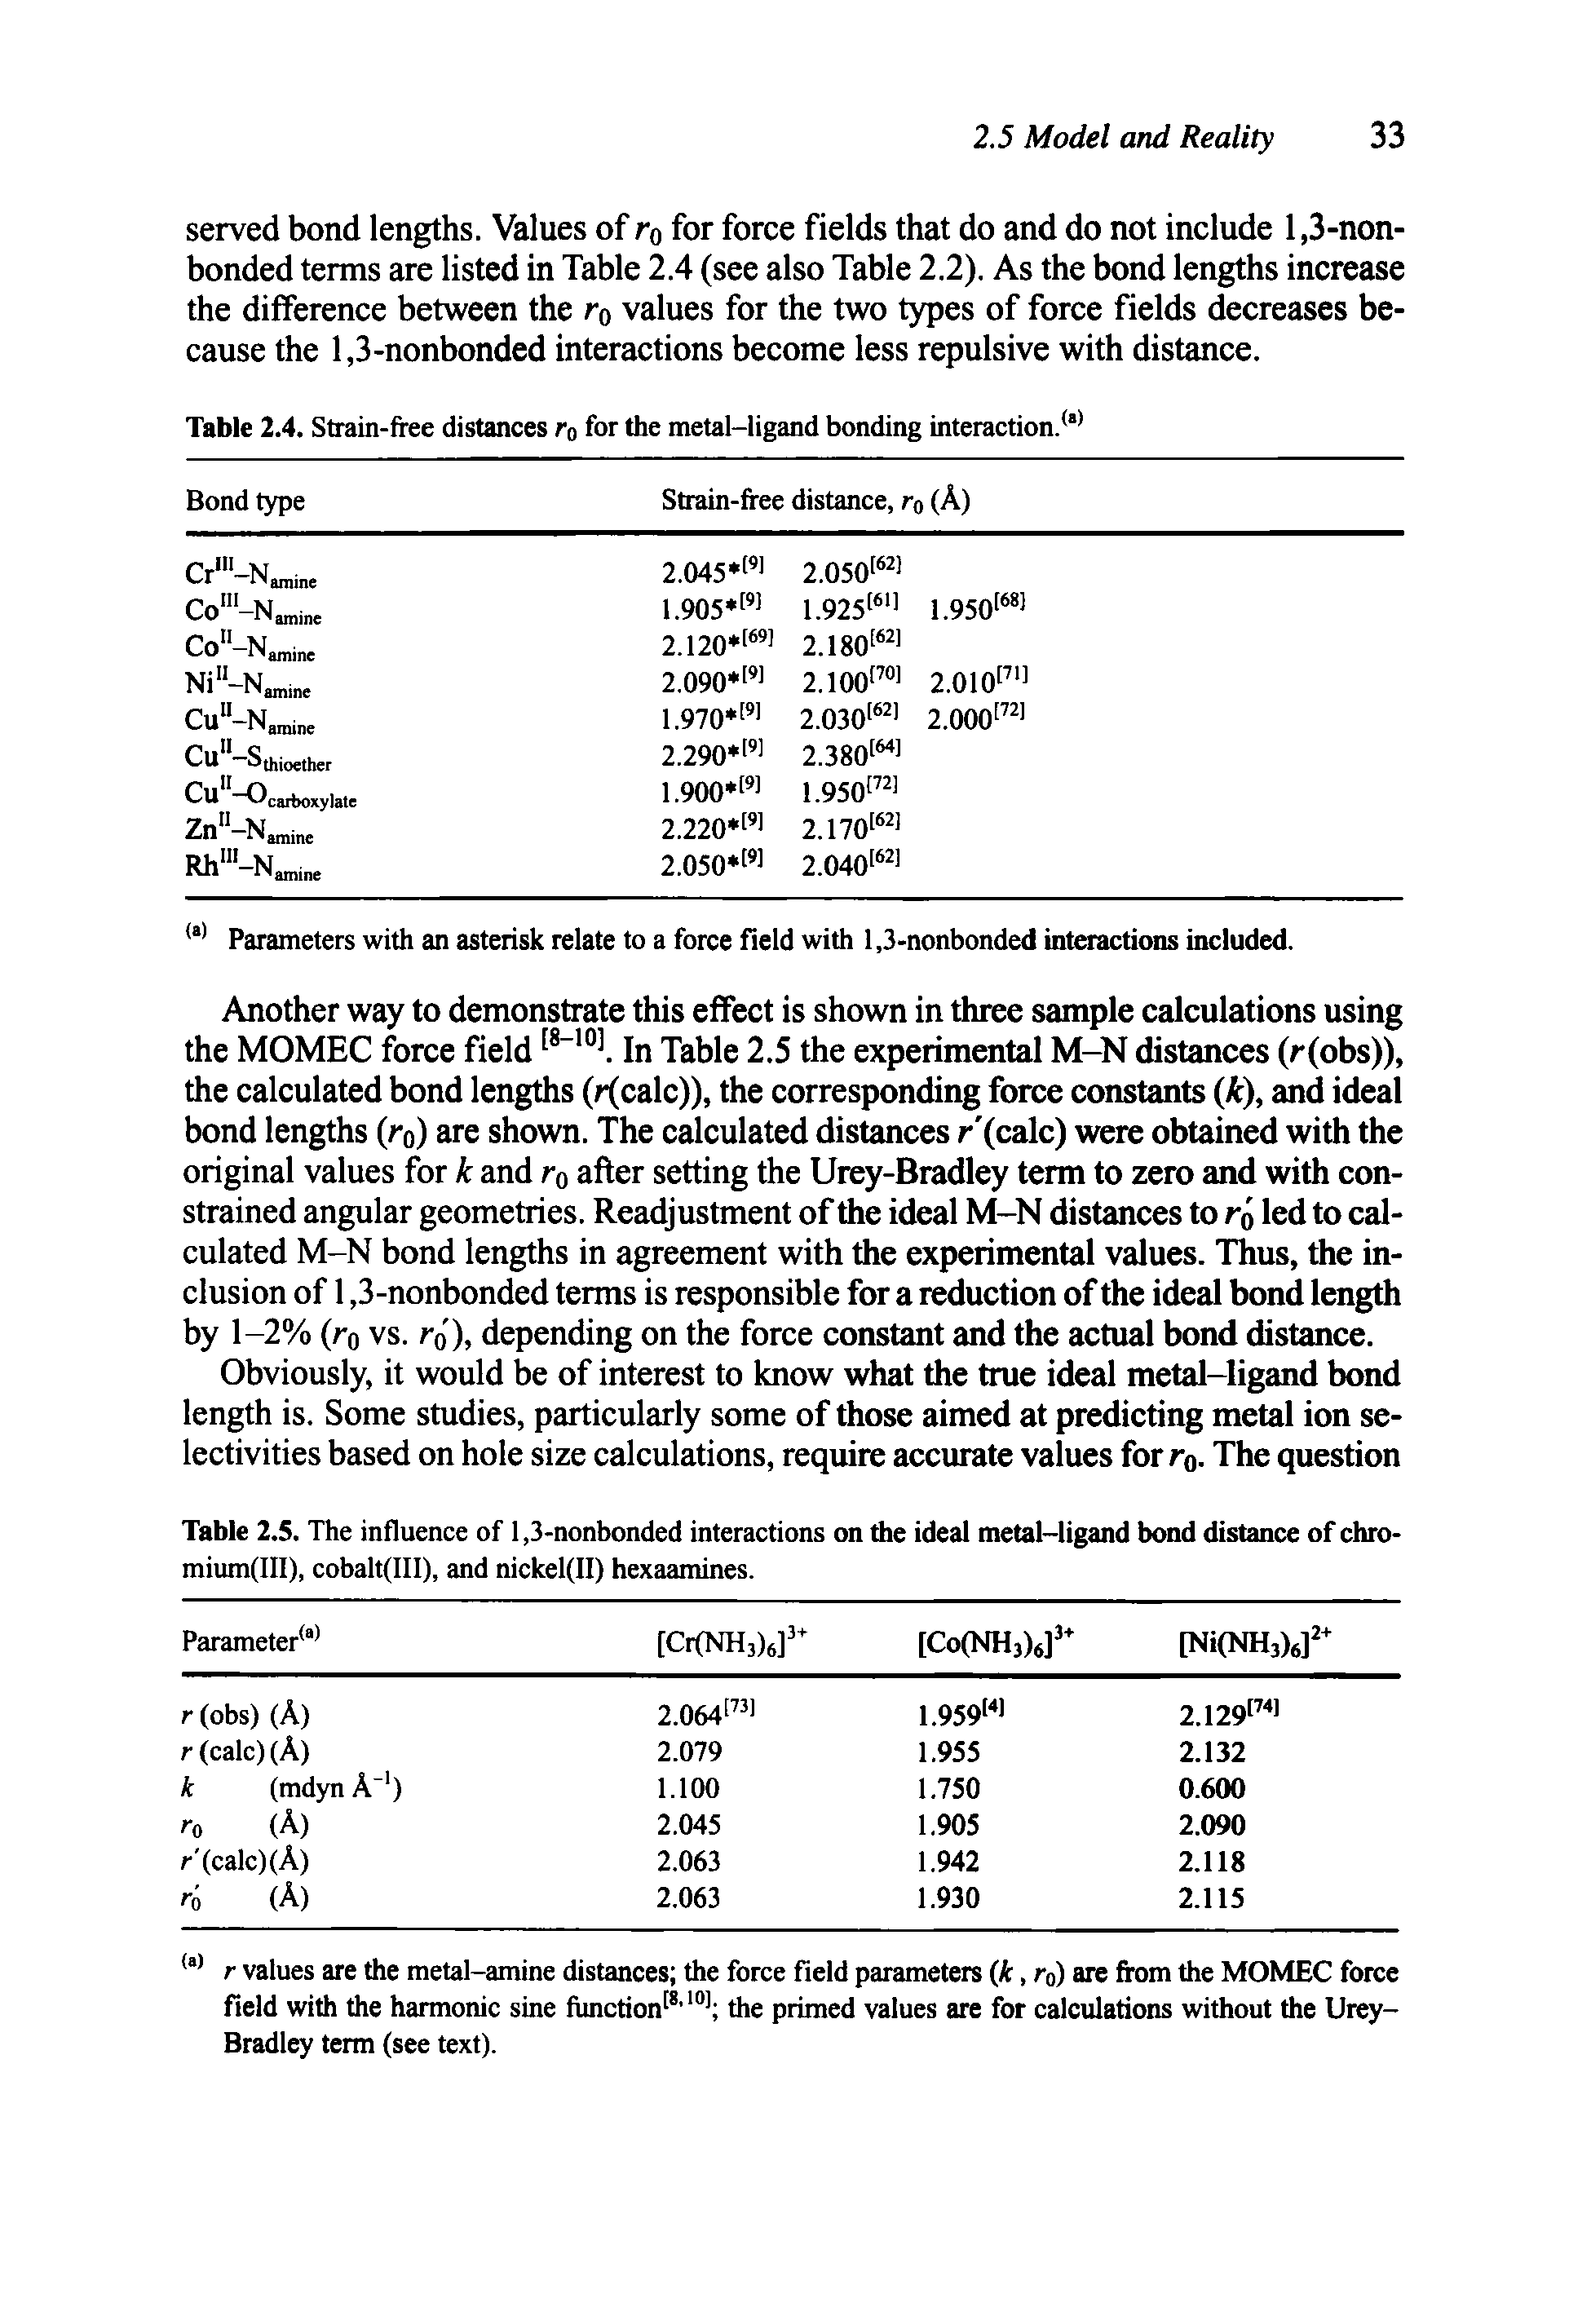 Table 2.5. The influence of 1,3-nonbonded interactions on the ideal metal-ligand bond distance of chro-mium(III), cobalt(III), and nickel(II) hexaamines.